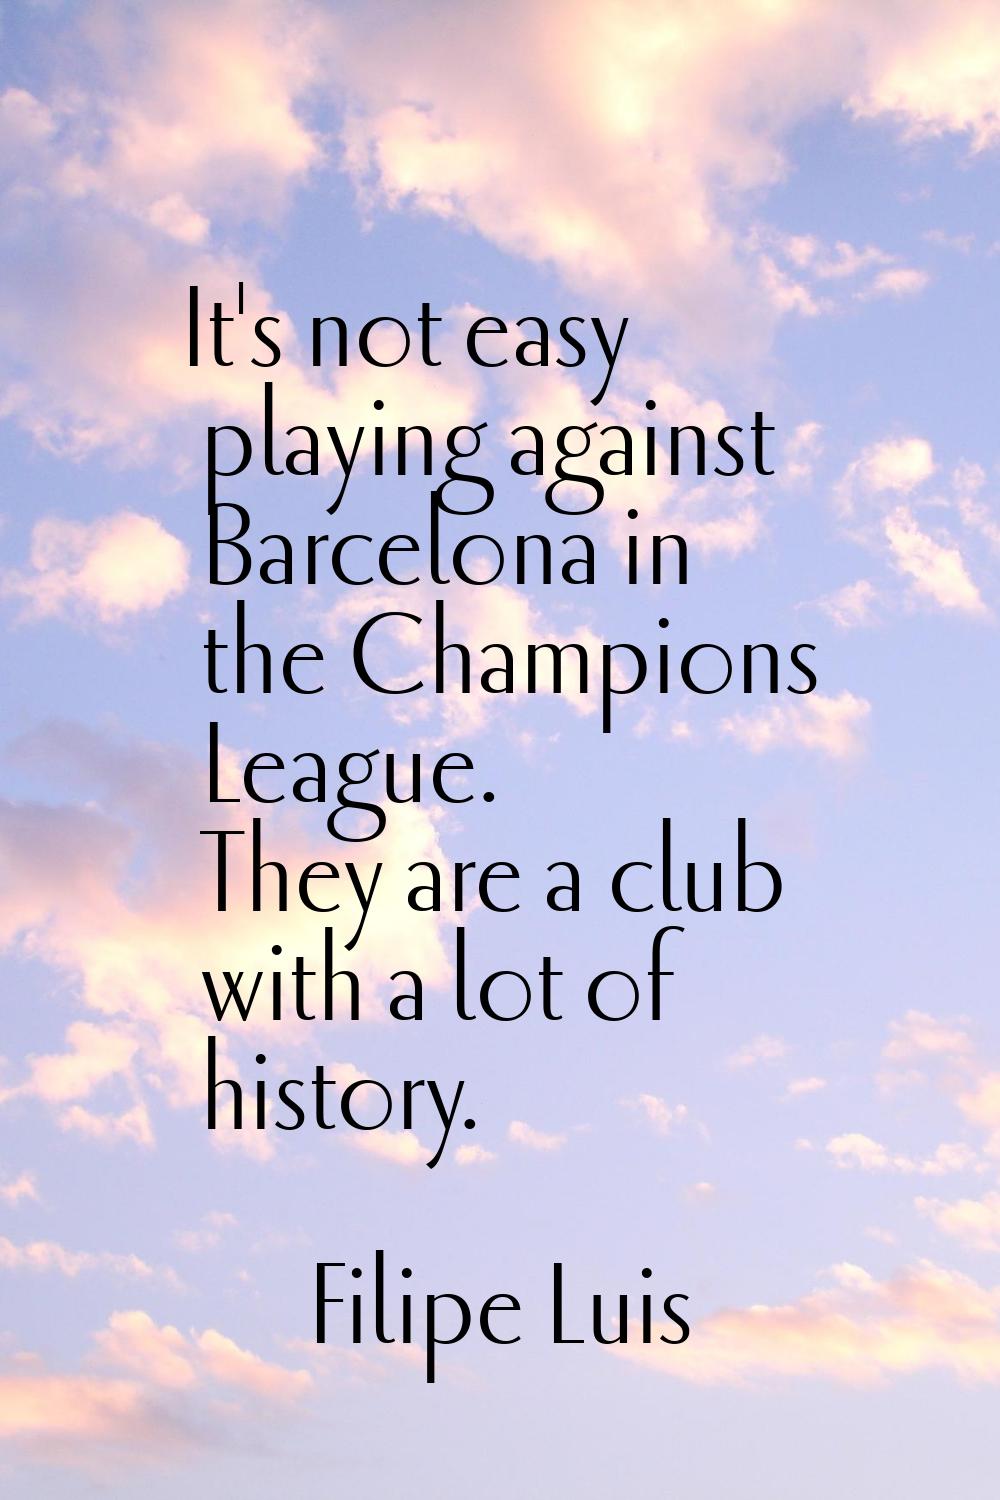 It's not easy playing against Barcelona in the Champions League. They are a club with a lot of hist